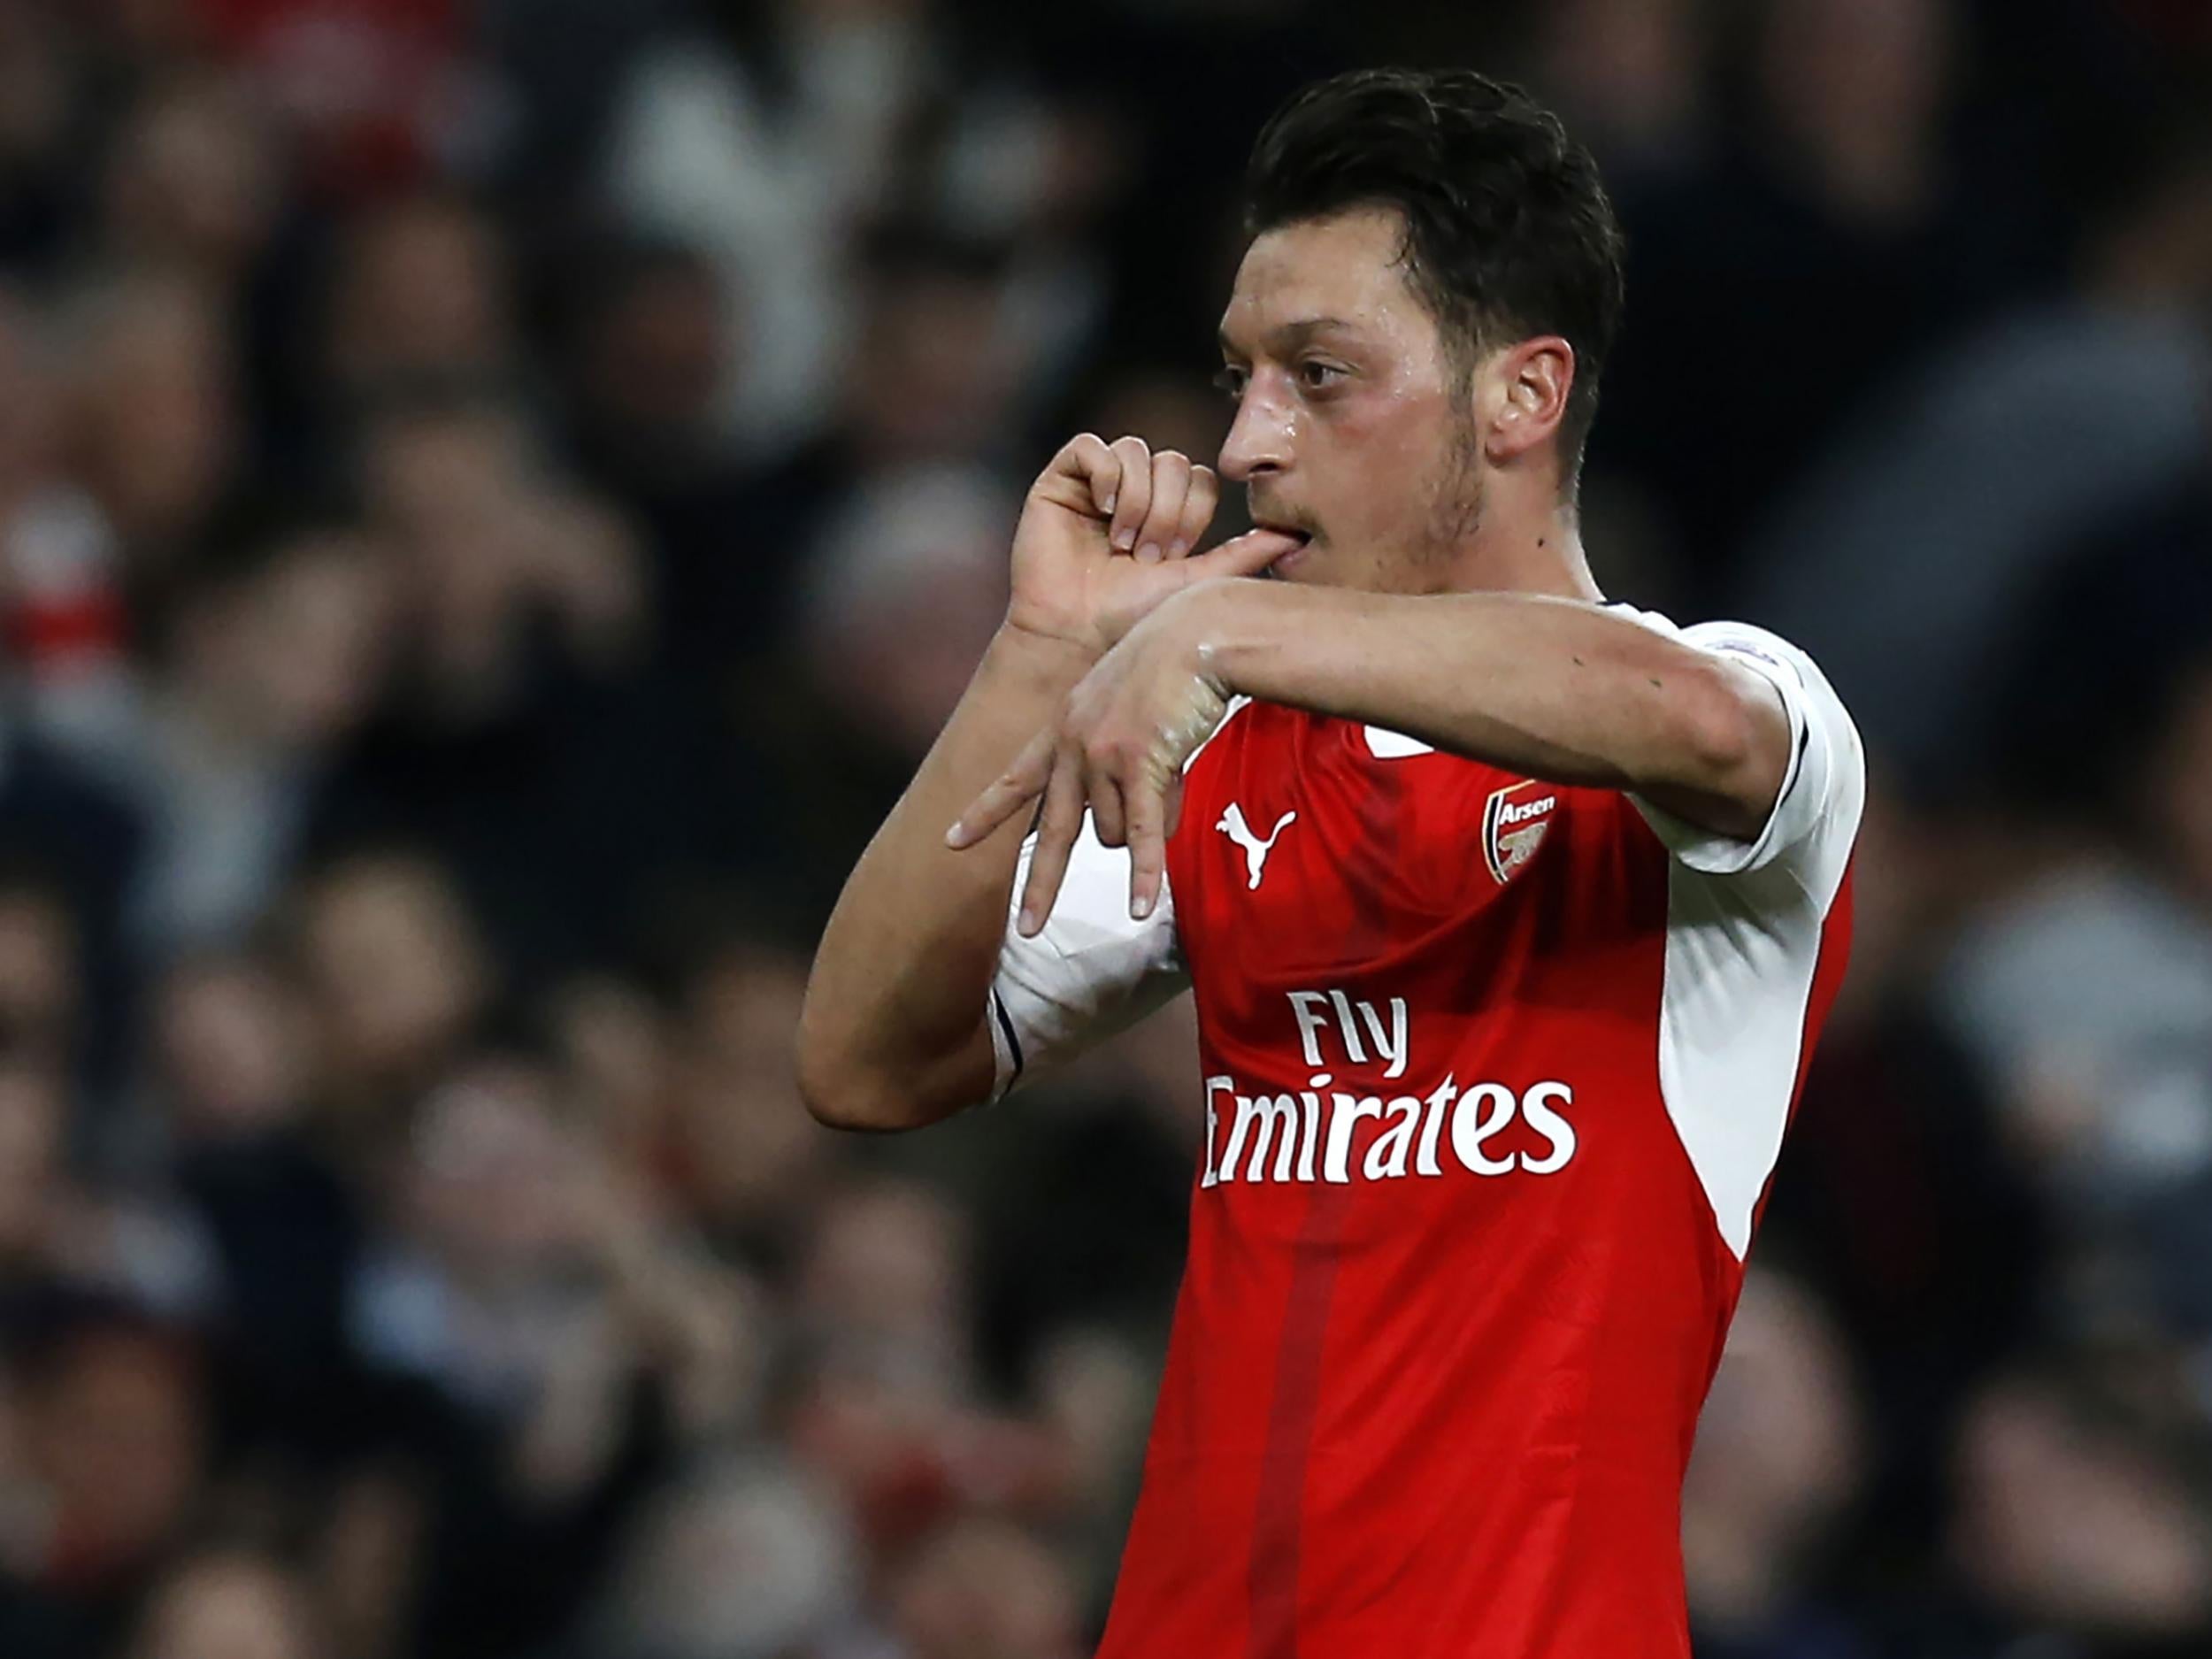 Mesut Ozil returned to form with an impressive display against the Hammers